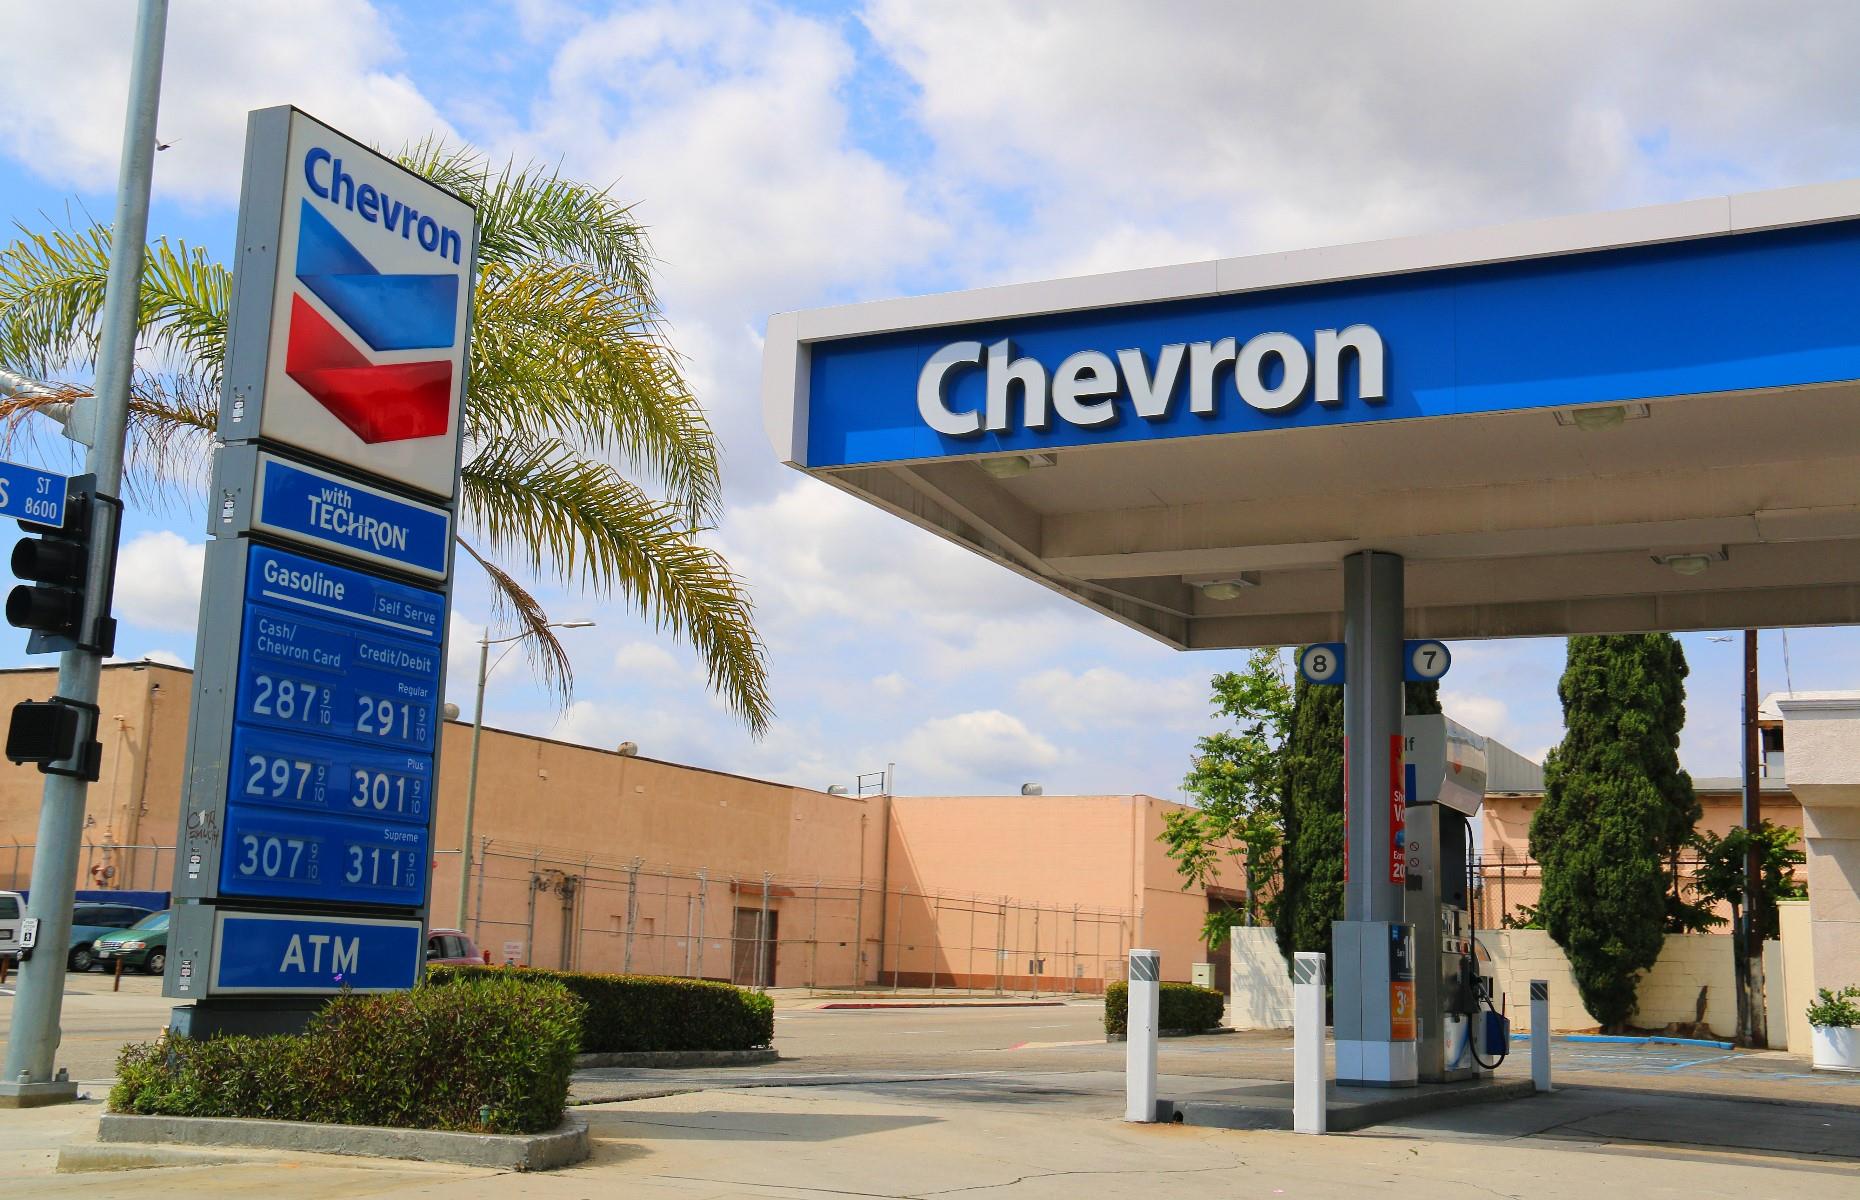 Chevron: up to 6,750 jobs to be cut